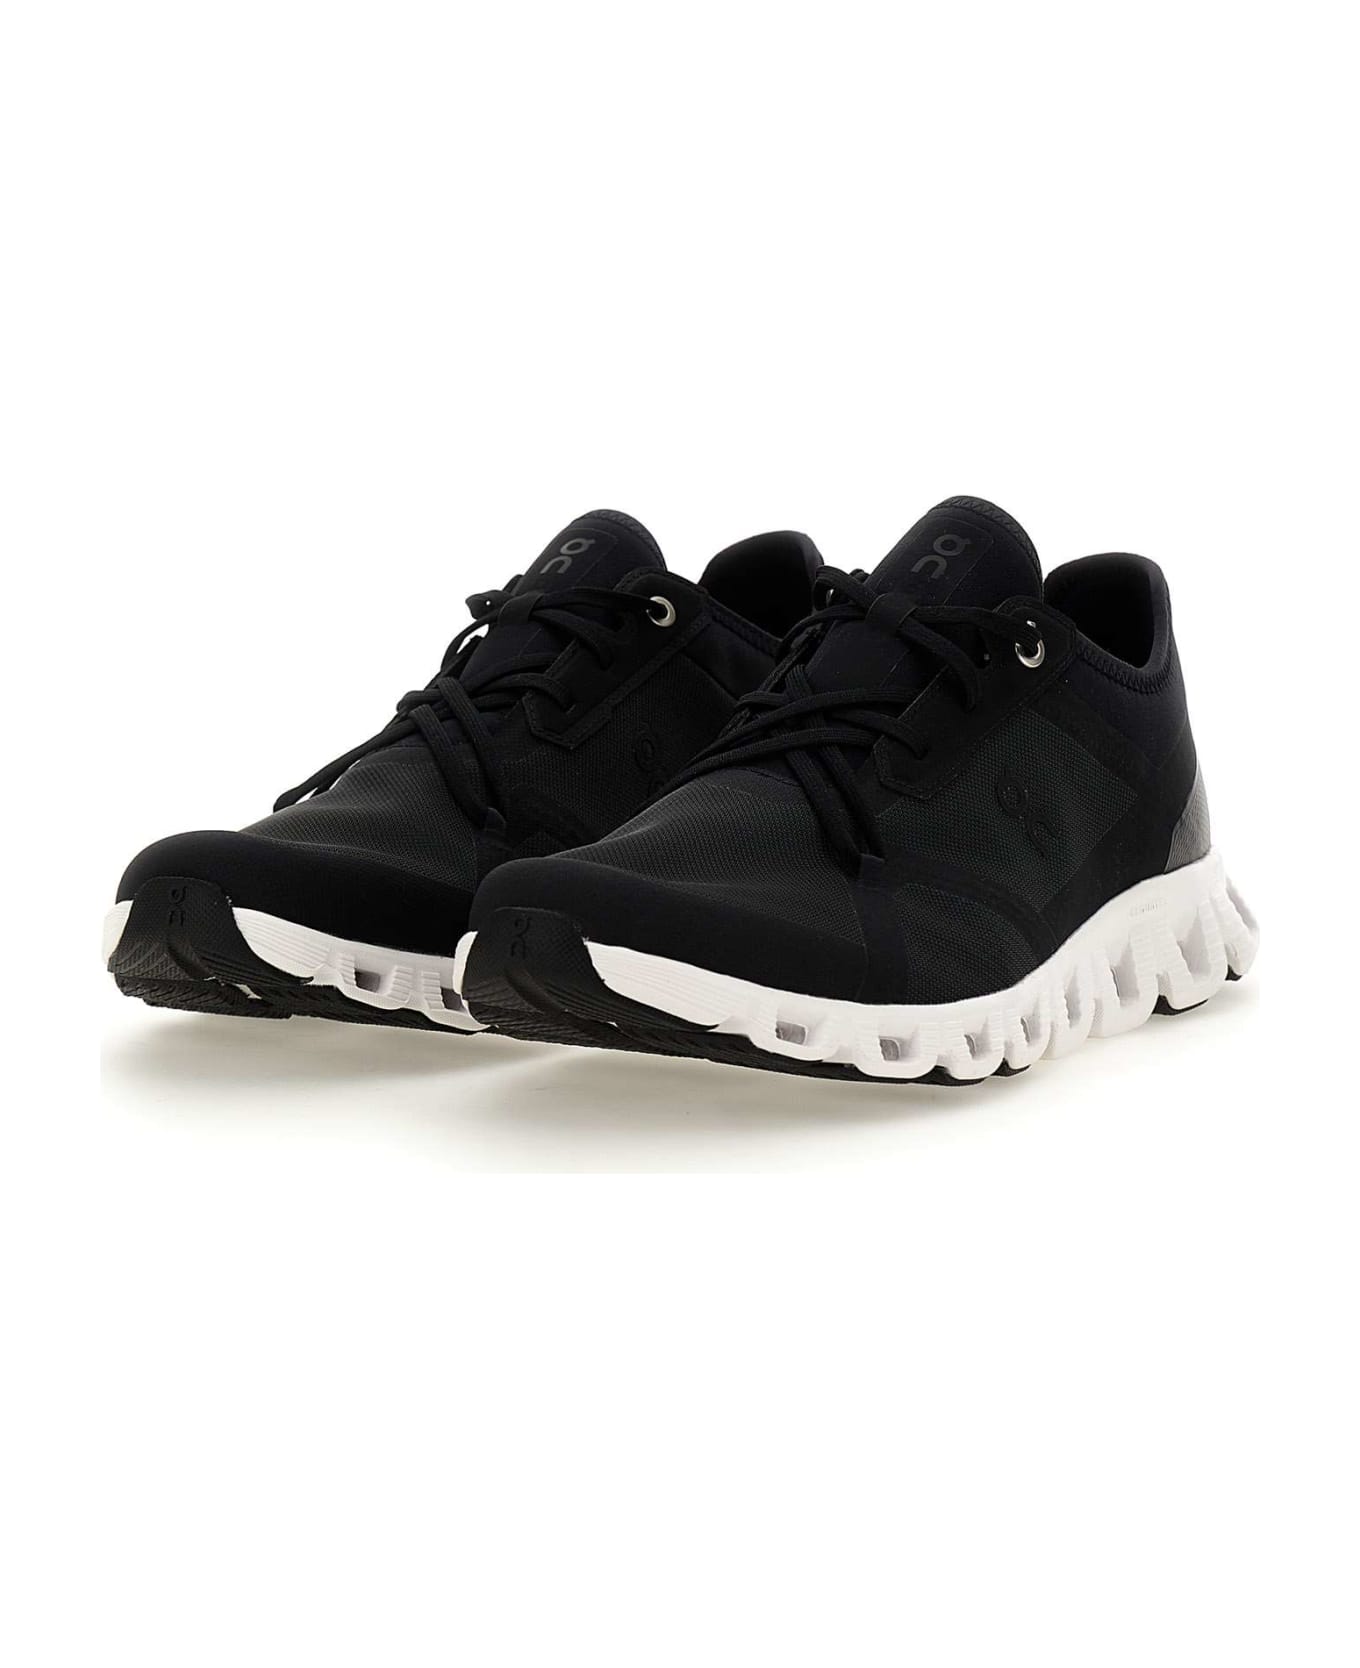 ON "cloud 3ad" Sneakers - BLACK-WHITE